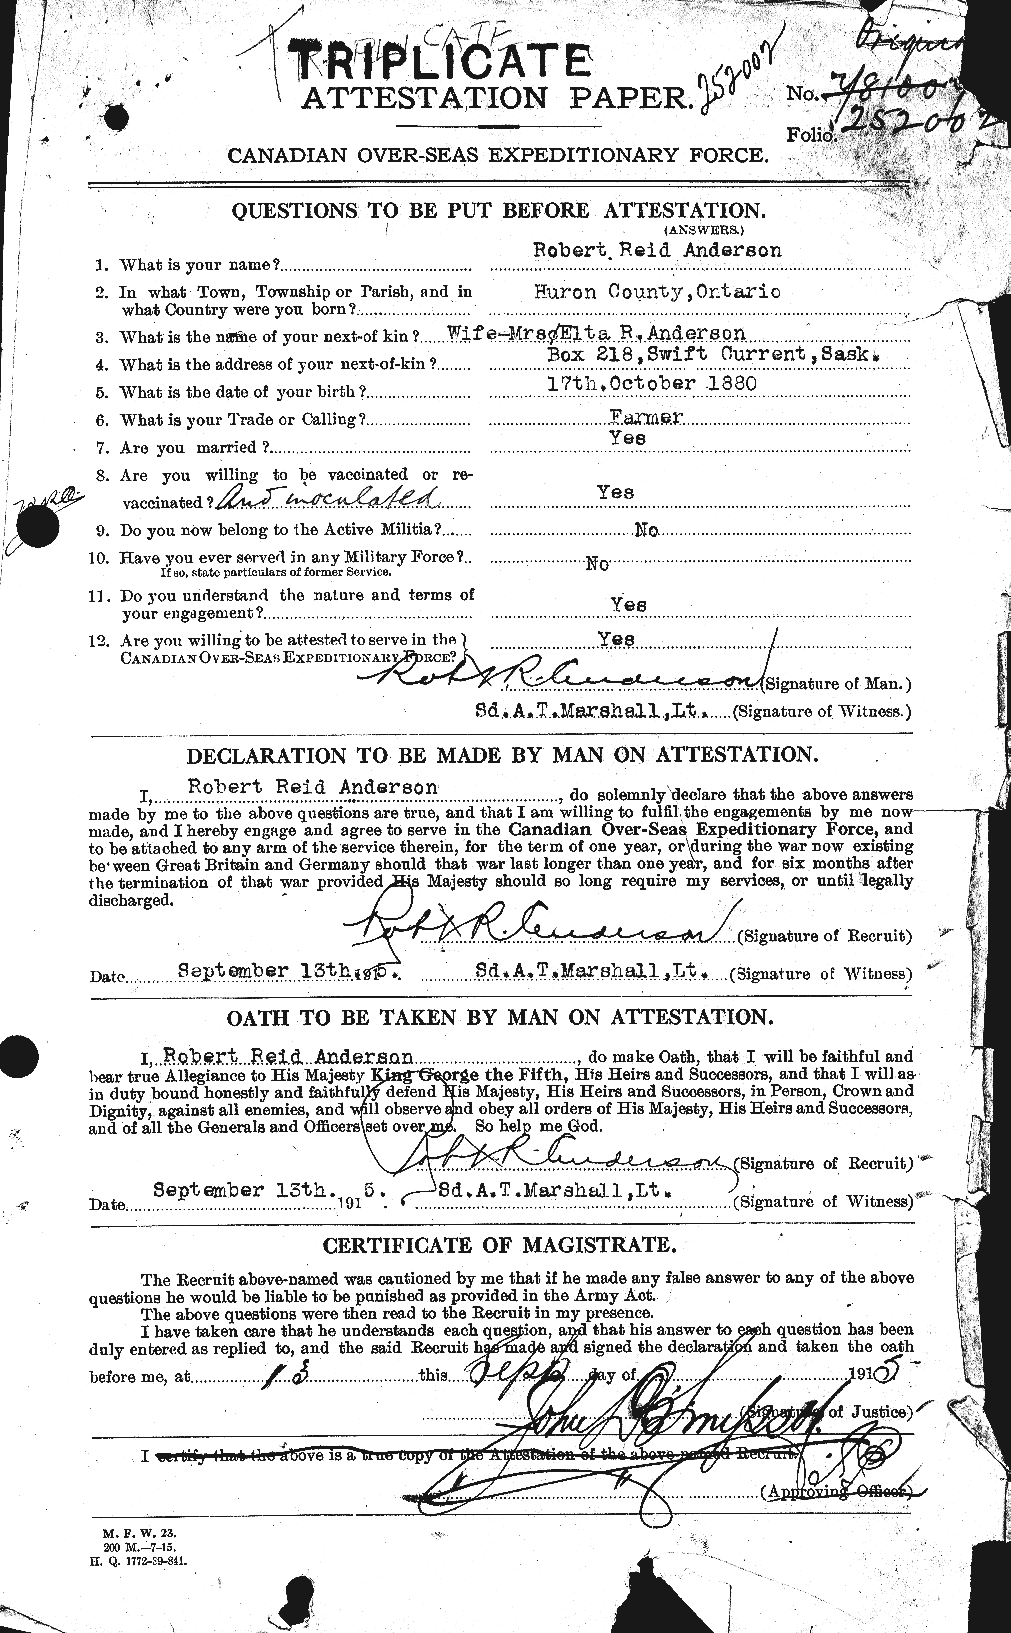 Personnel Records of the First World War - CEF 207228a